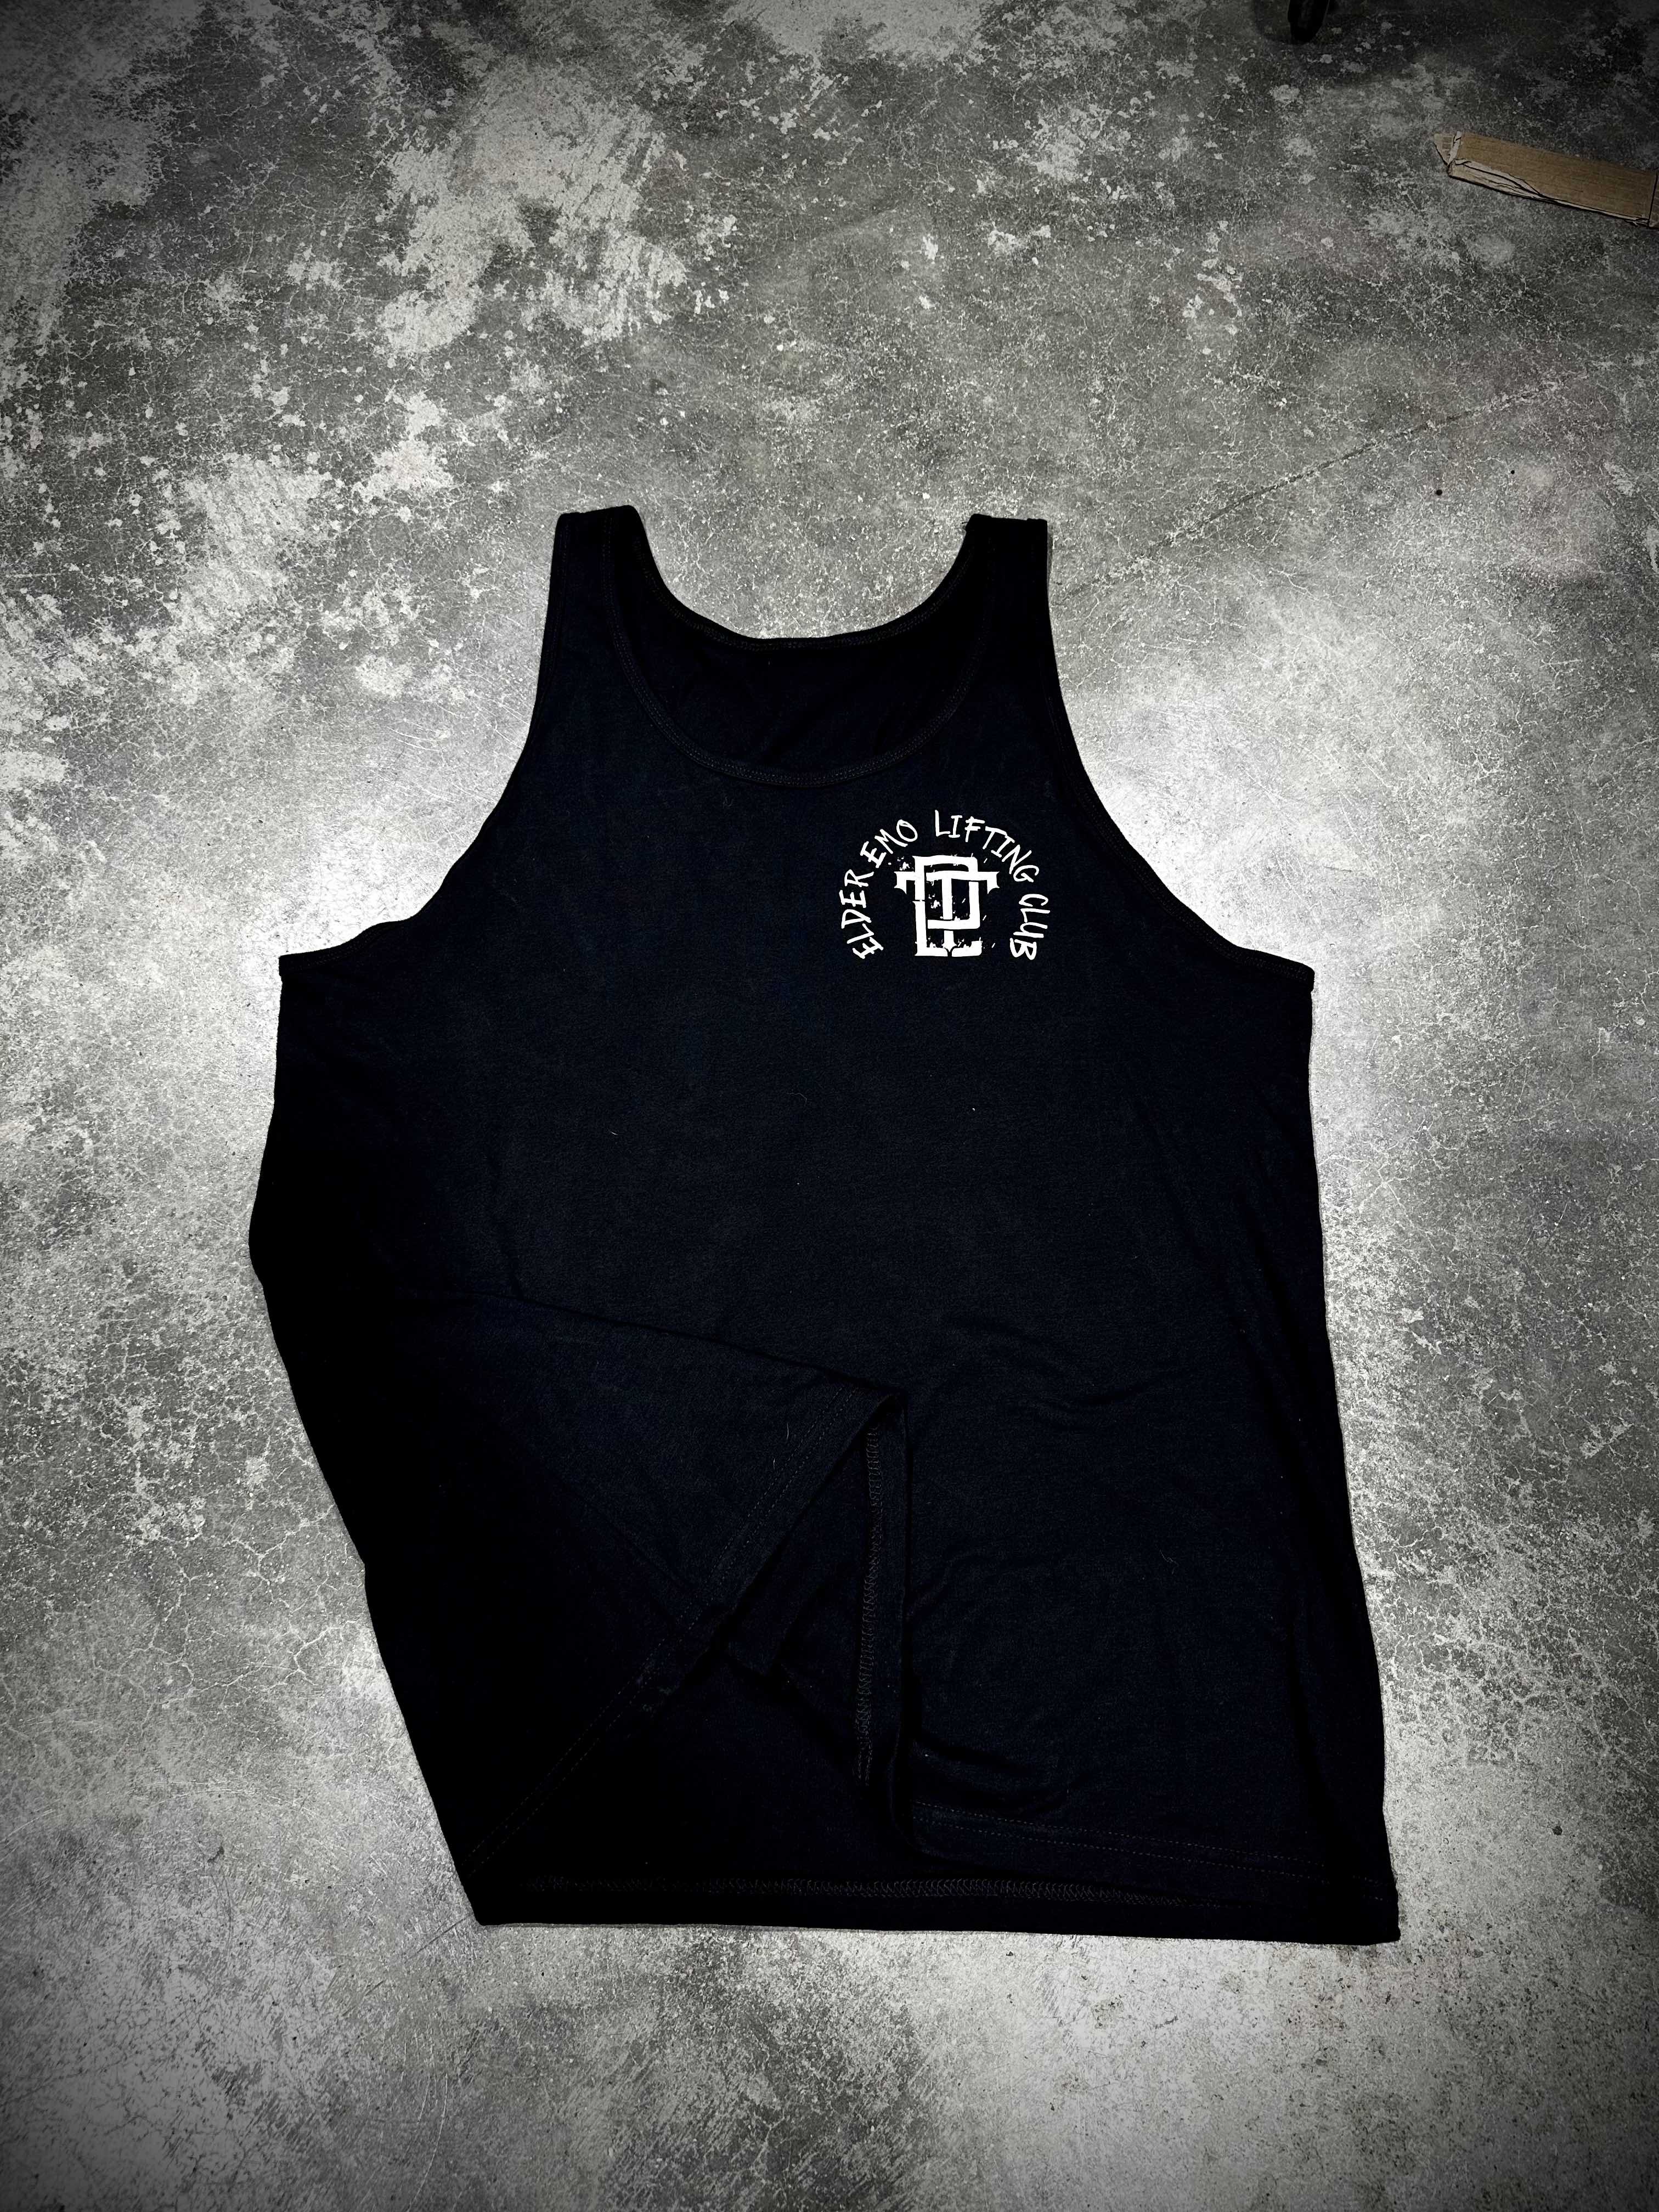 Pain for Gains Tank - Dude That Lifts